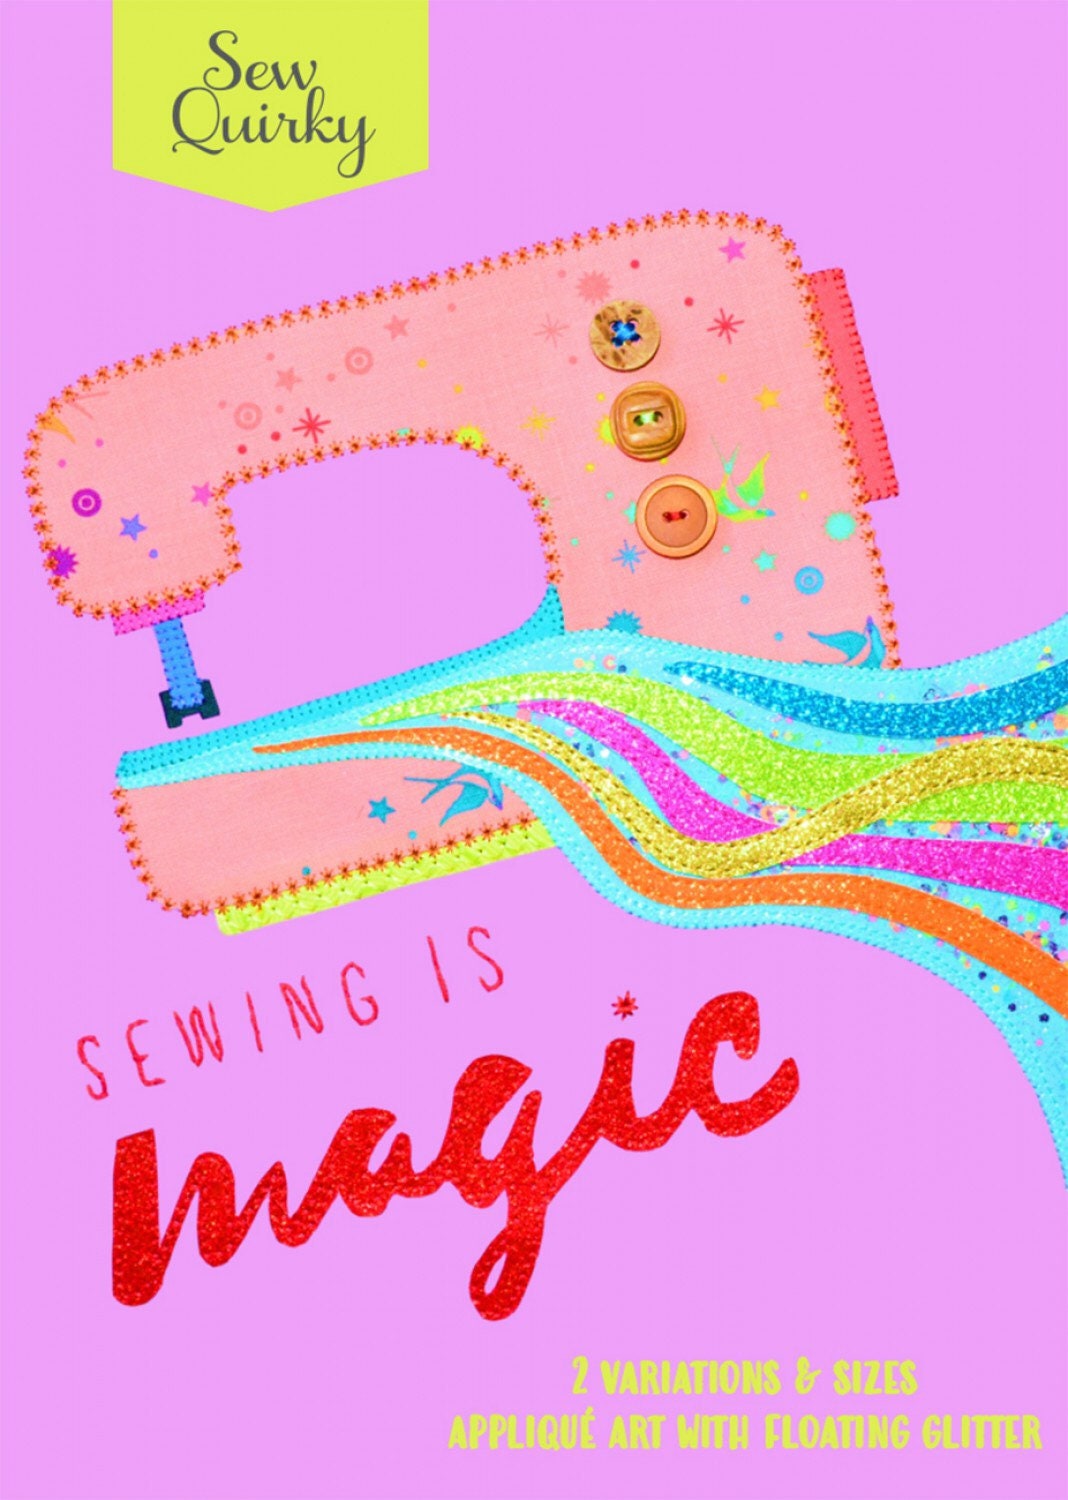 Sewing is Magic - Sew Quirky - Mandy Murray - Appliqué Pattern - Mini Quilt Pattern